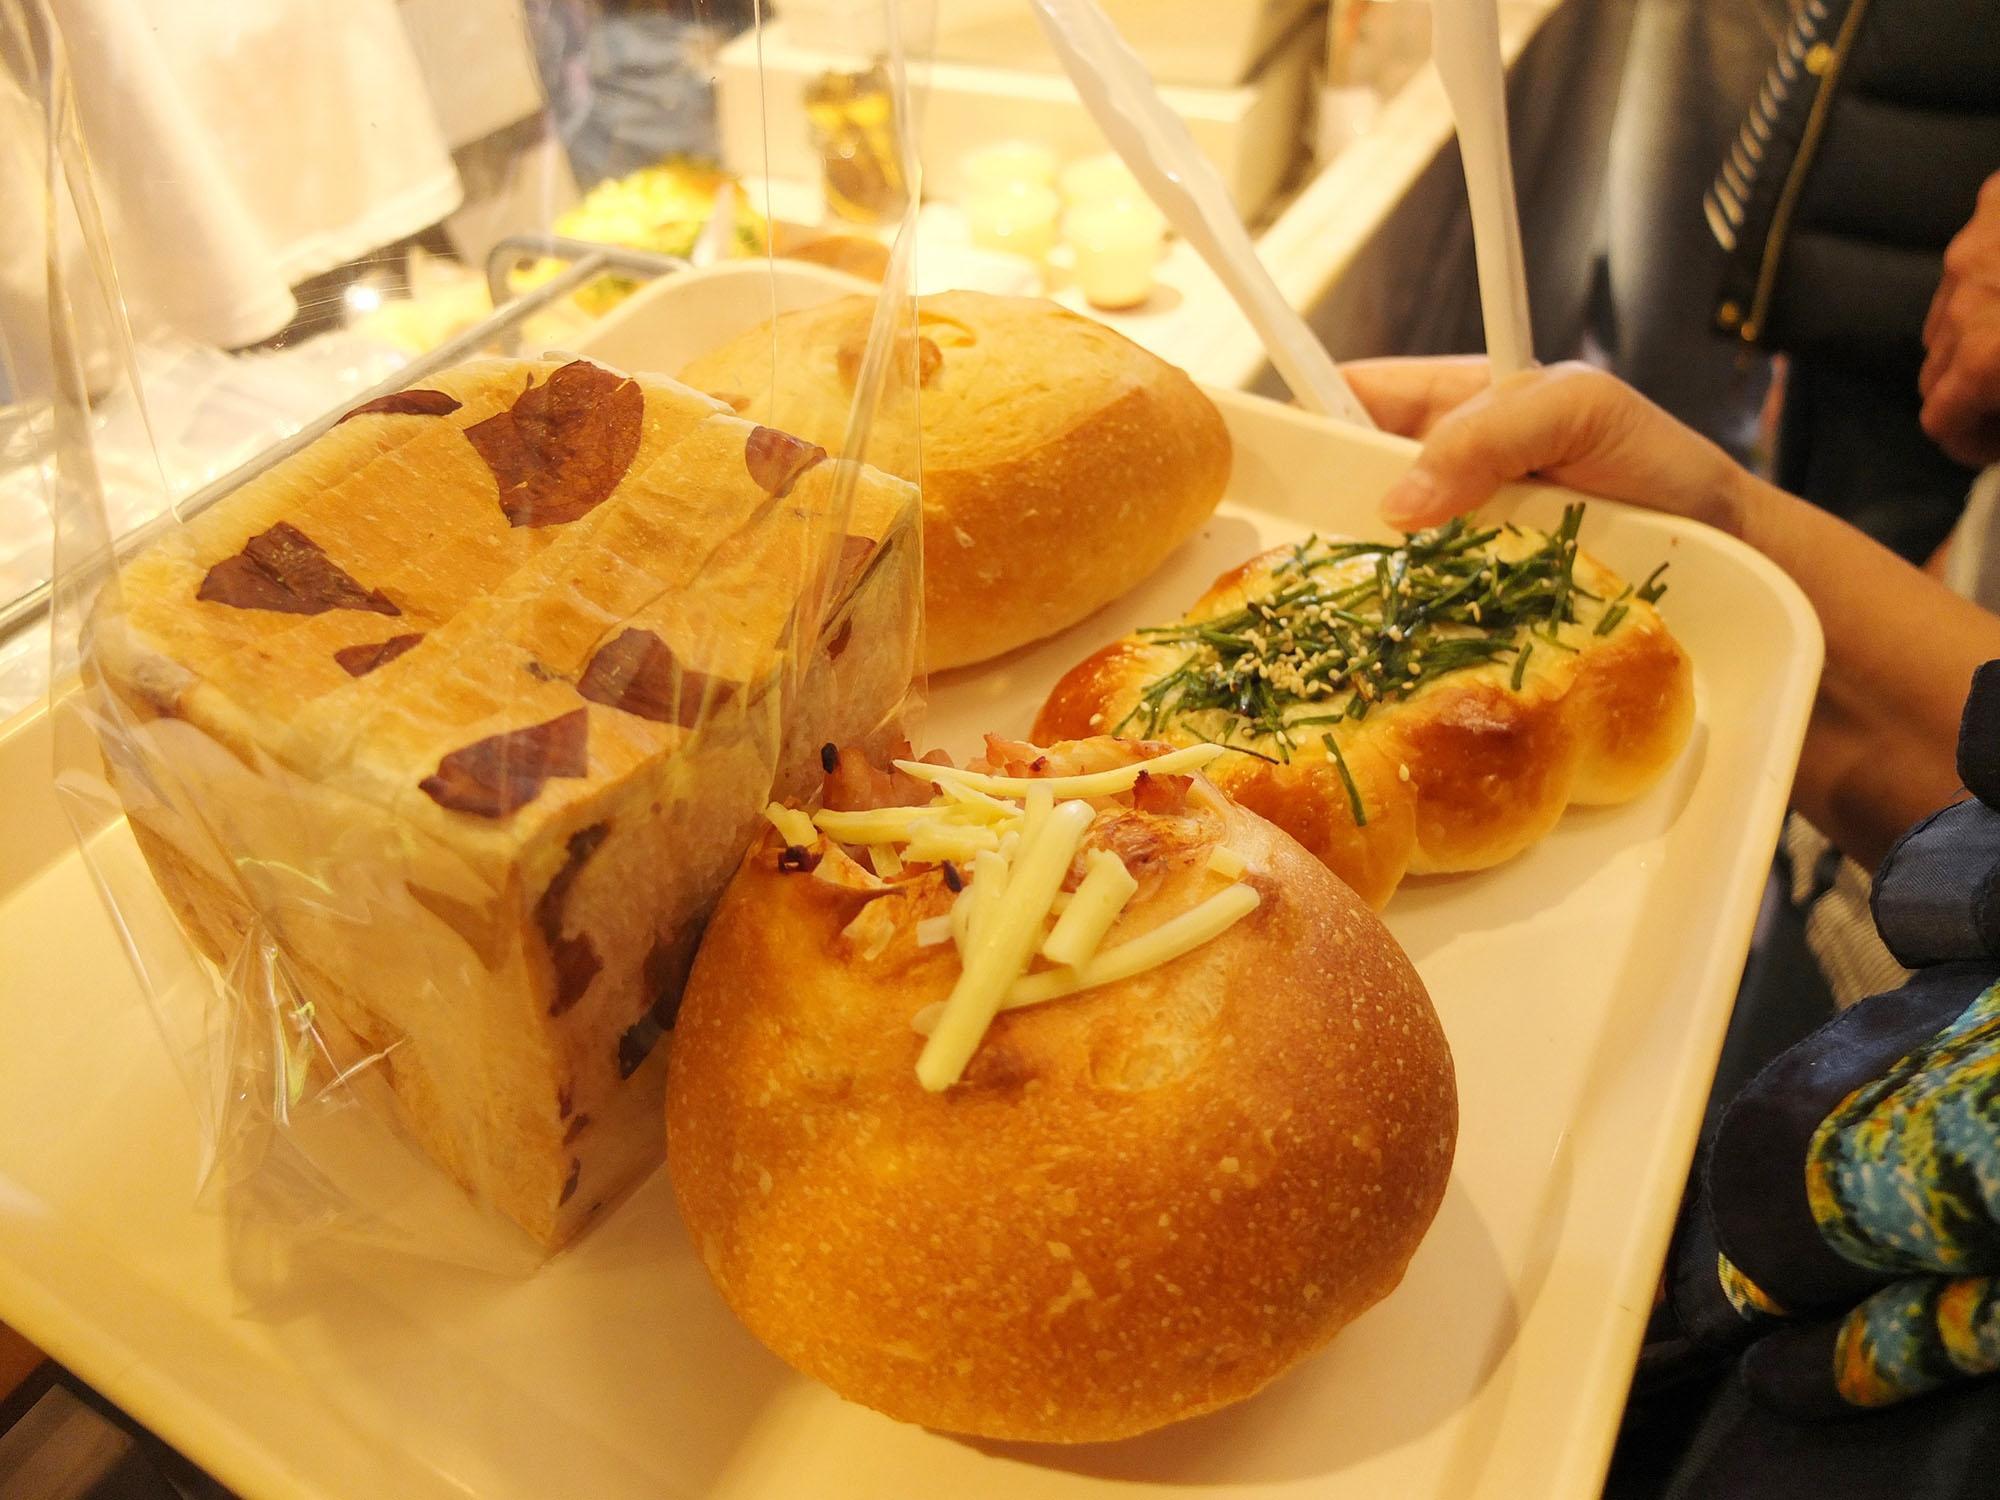 The bread made using the local agricultural ingredient, water snowflake, was especially popular.